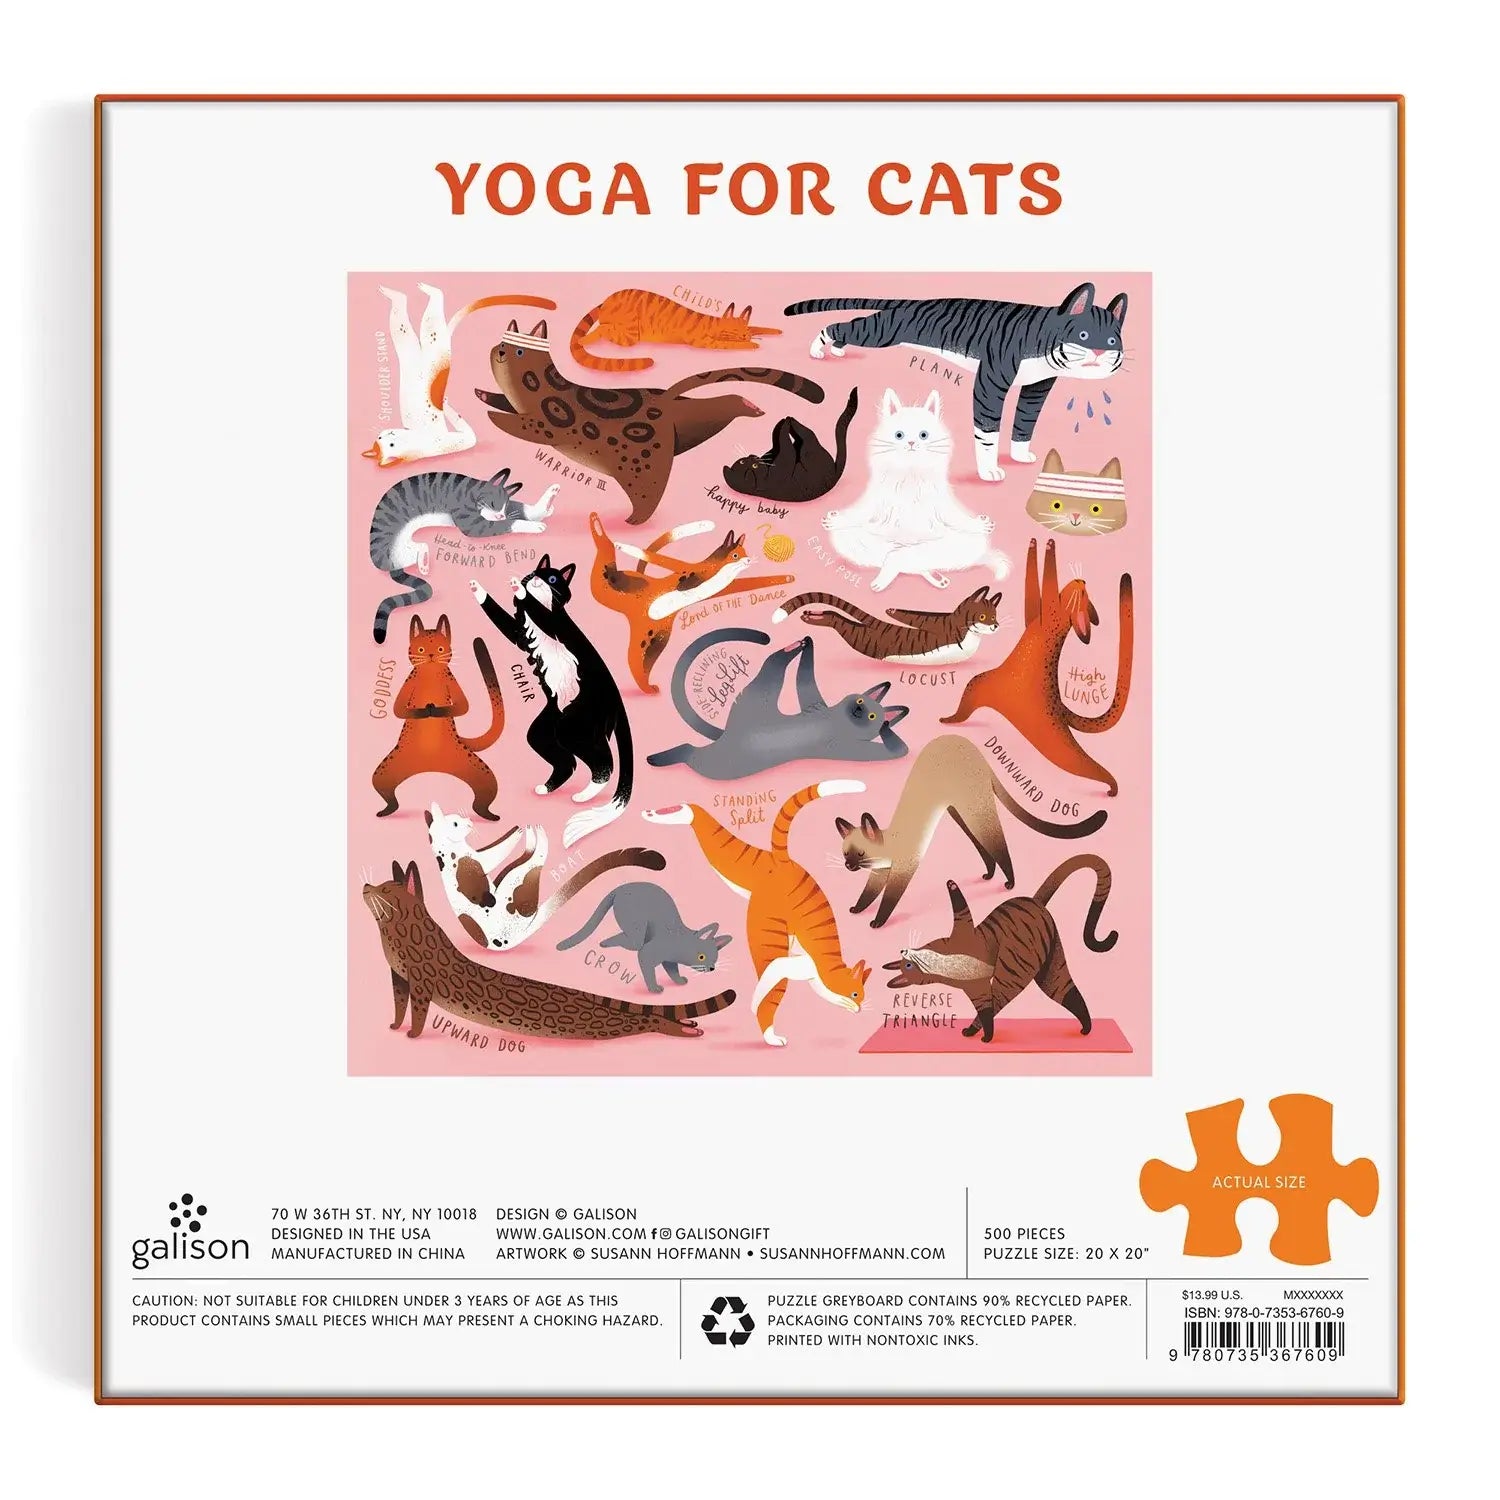 Yoga for Cats 500 Piece Puzzle Games Galison Prettycleanshop